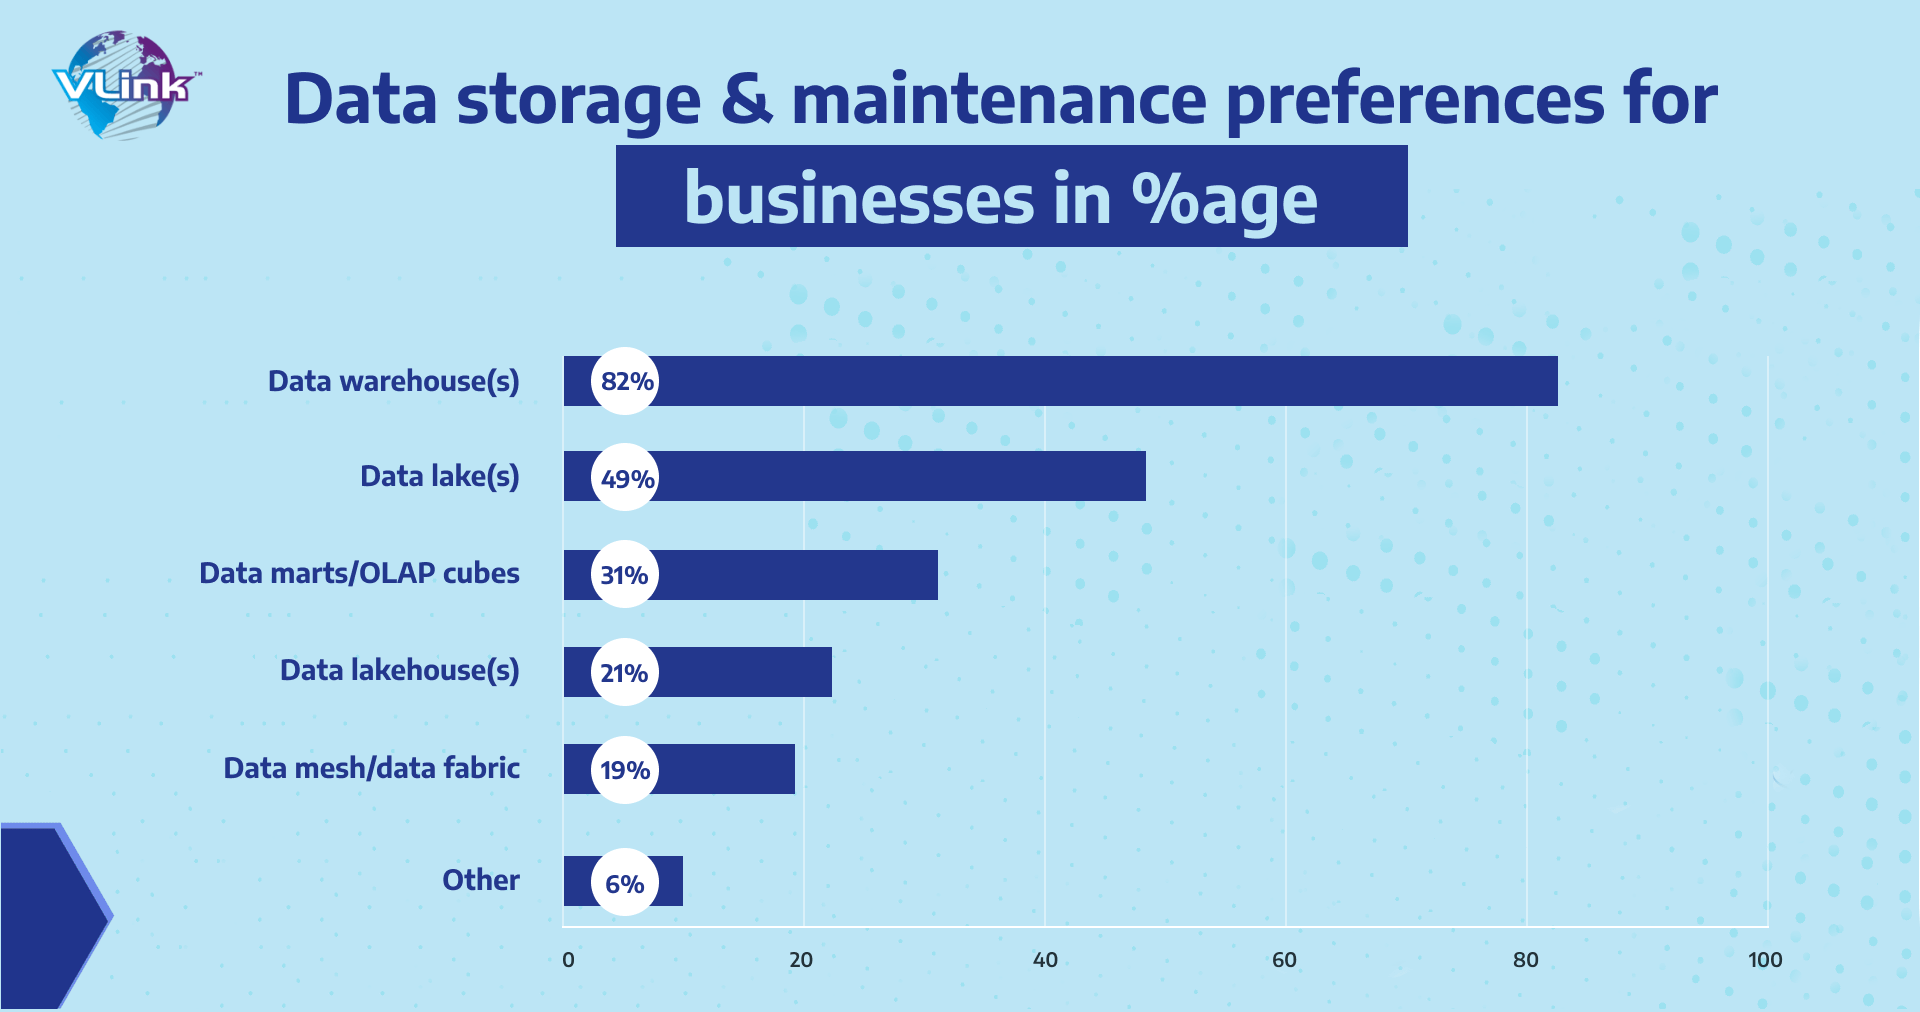 Data Storage & maintenance preferences for businesses in %age